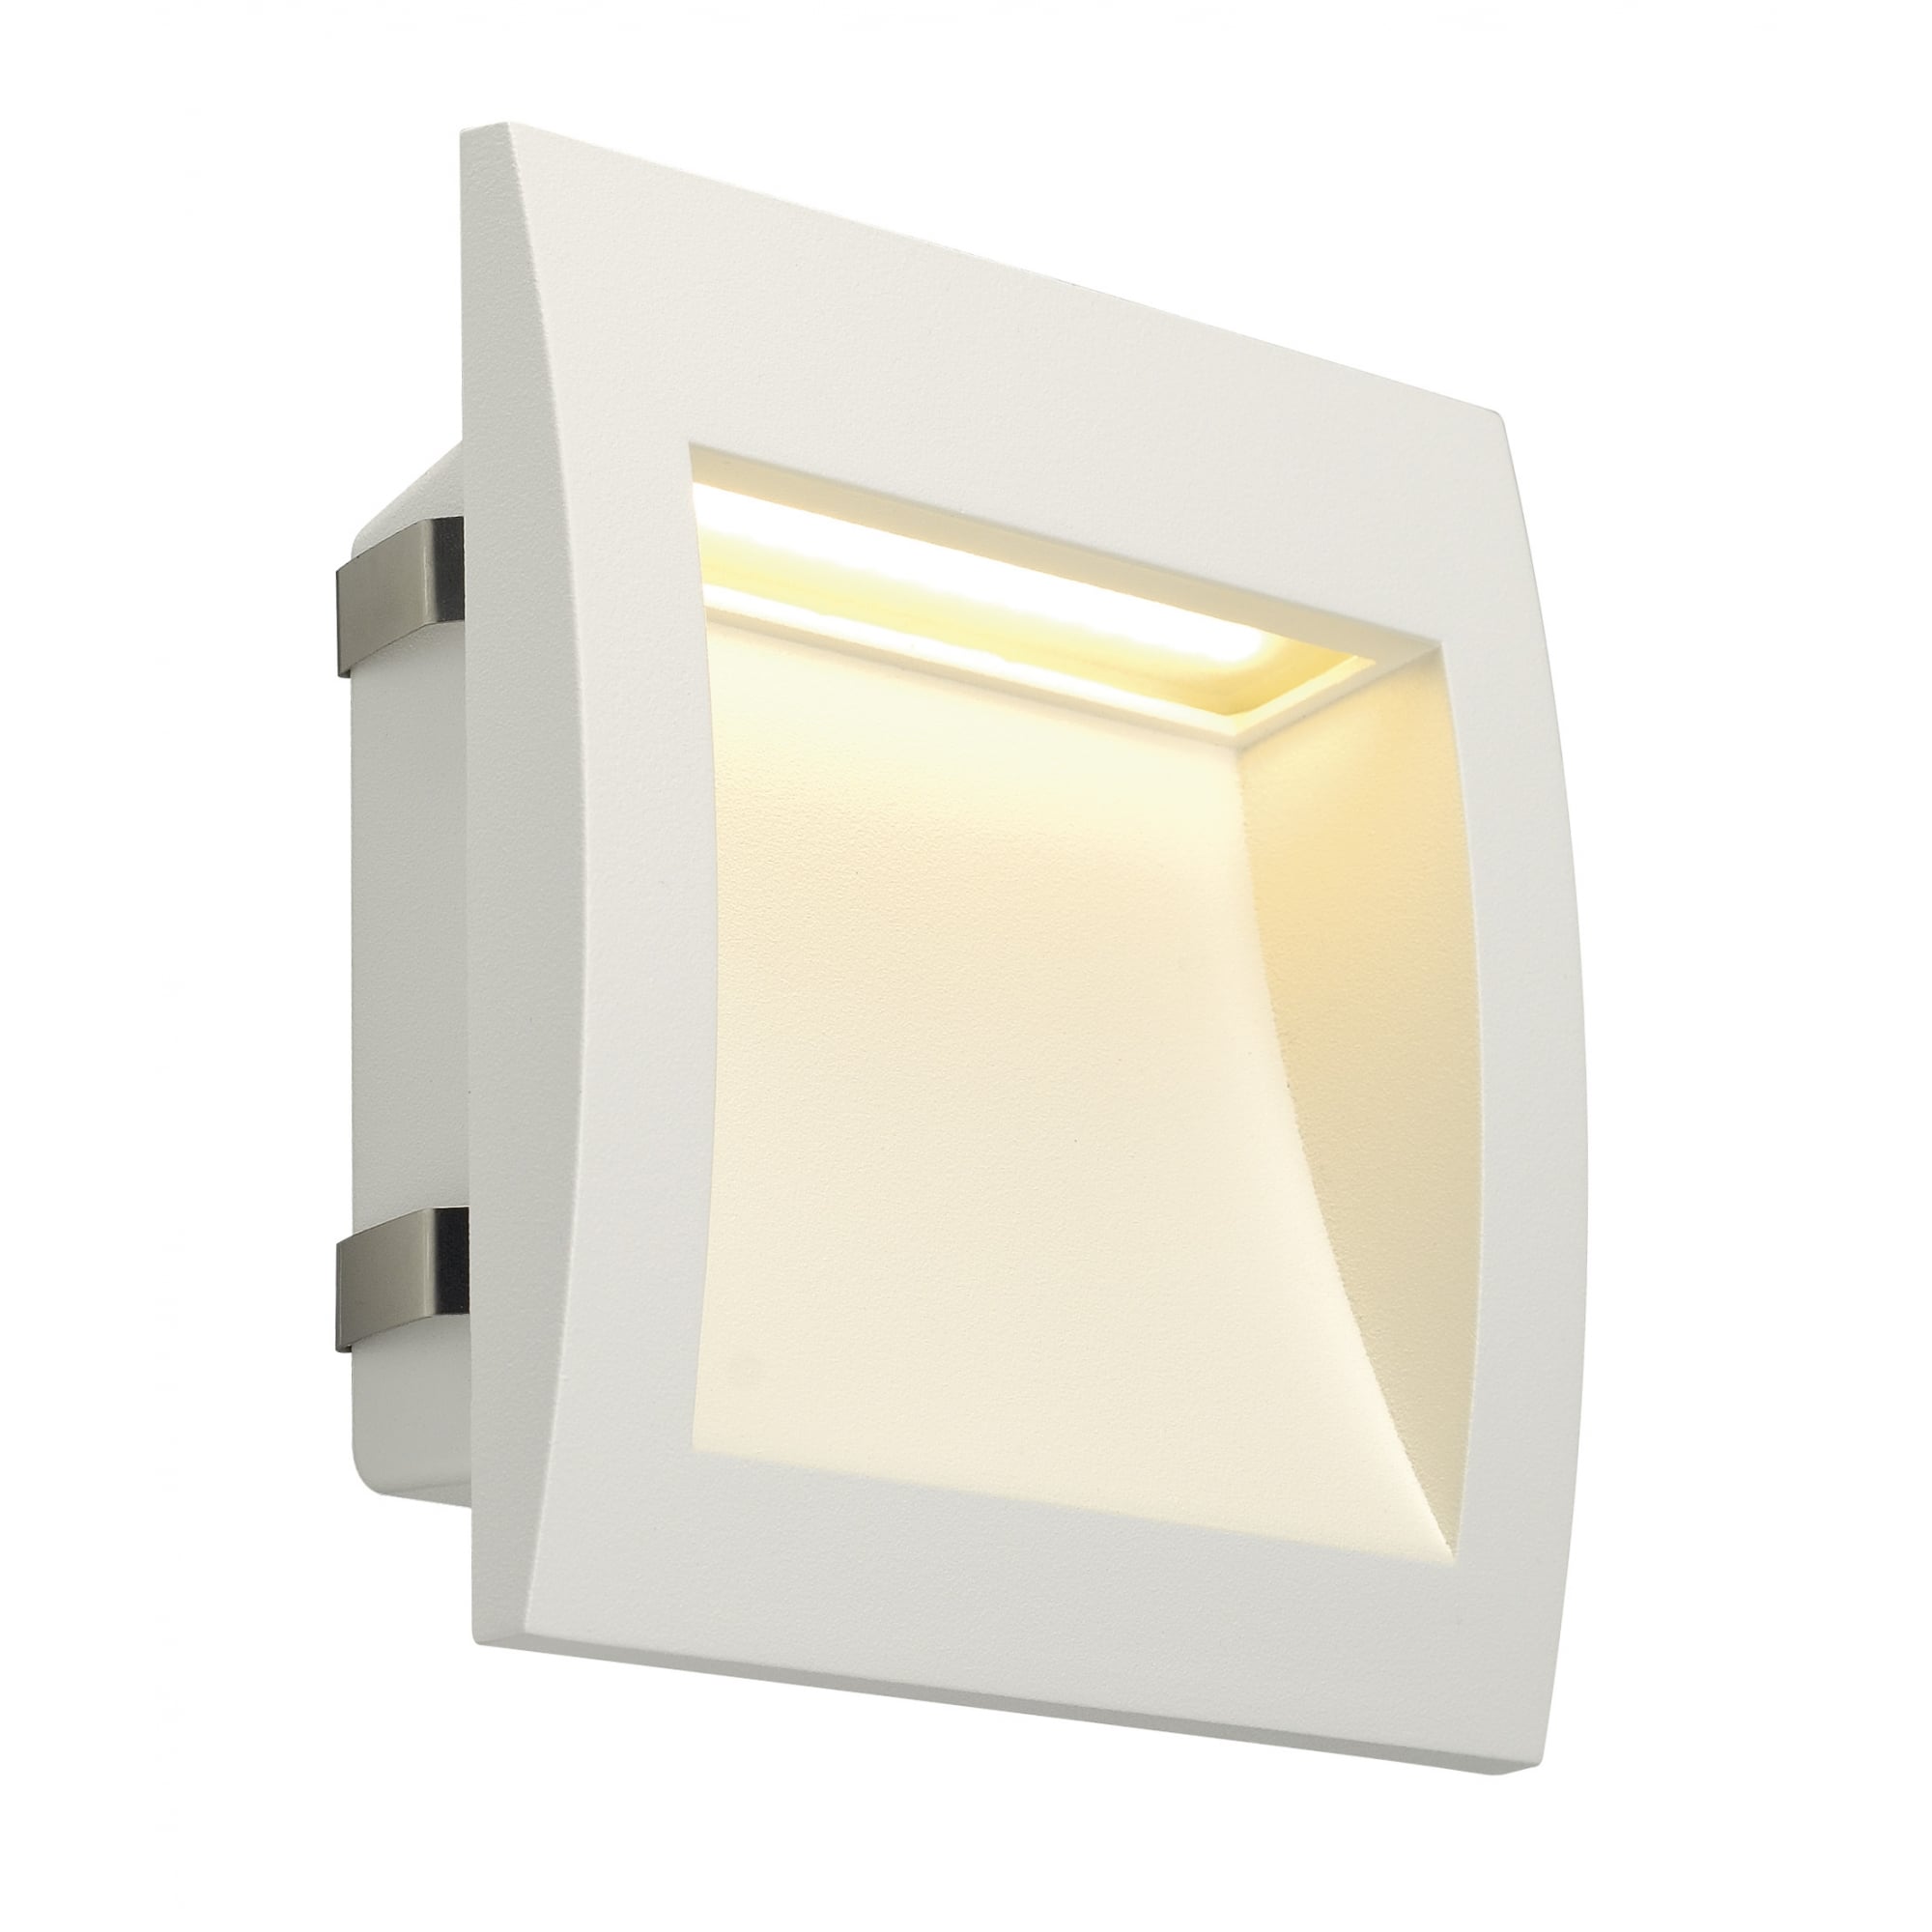 Downunder Square (L) Recessed LED White Wall Light, 3K, IP55